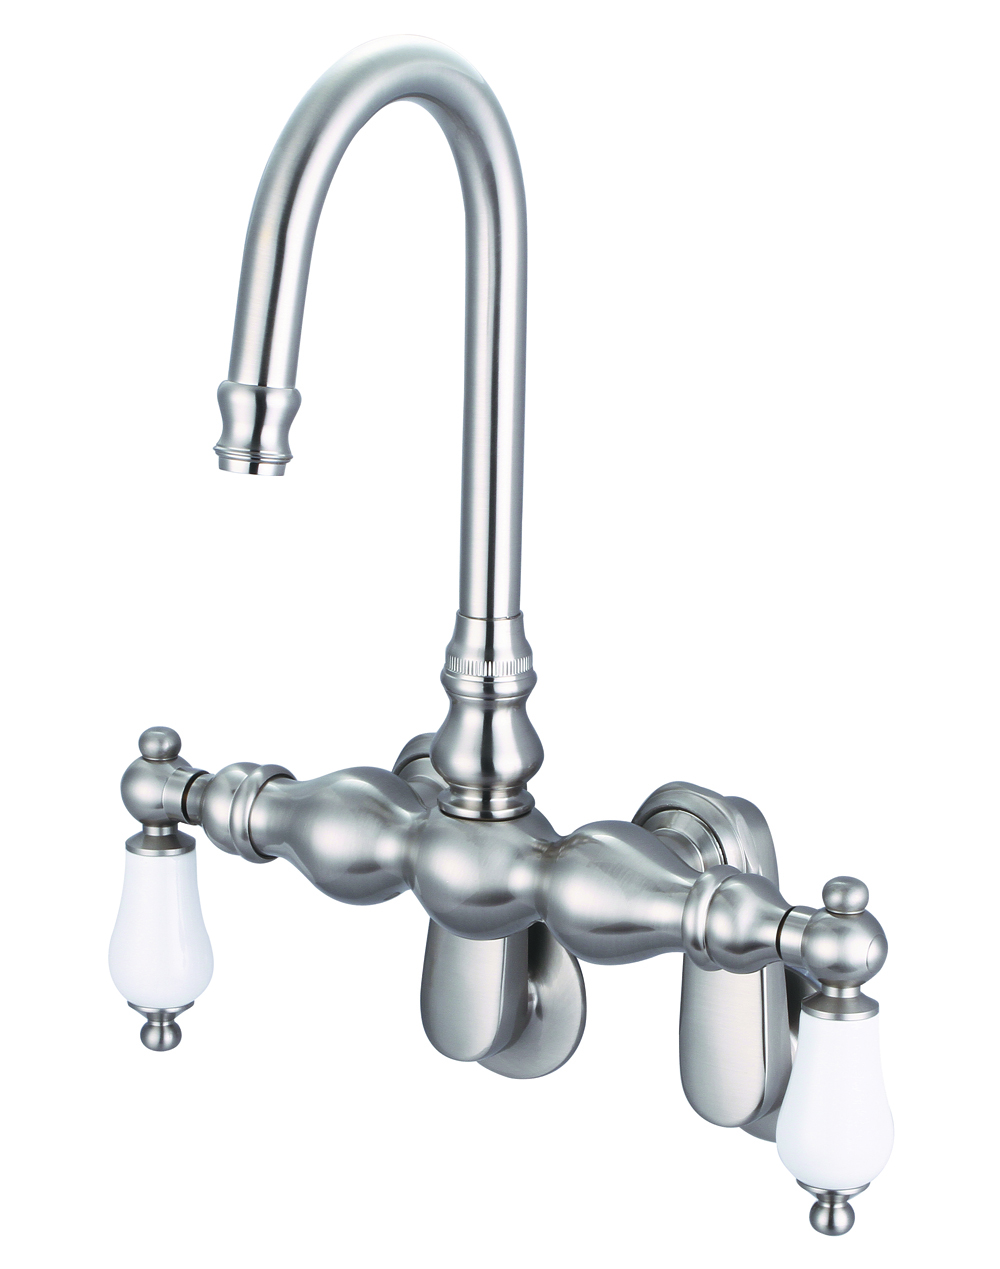 Adjustable Spread Wall Mount Tub Faucet With Gooseneck Spout & Swivel Wall Connector